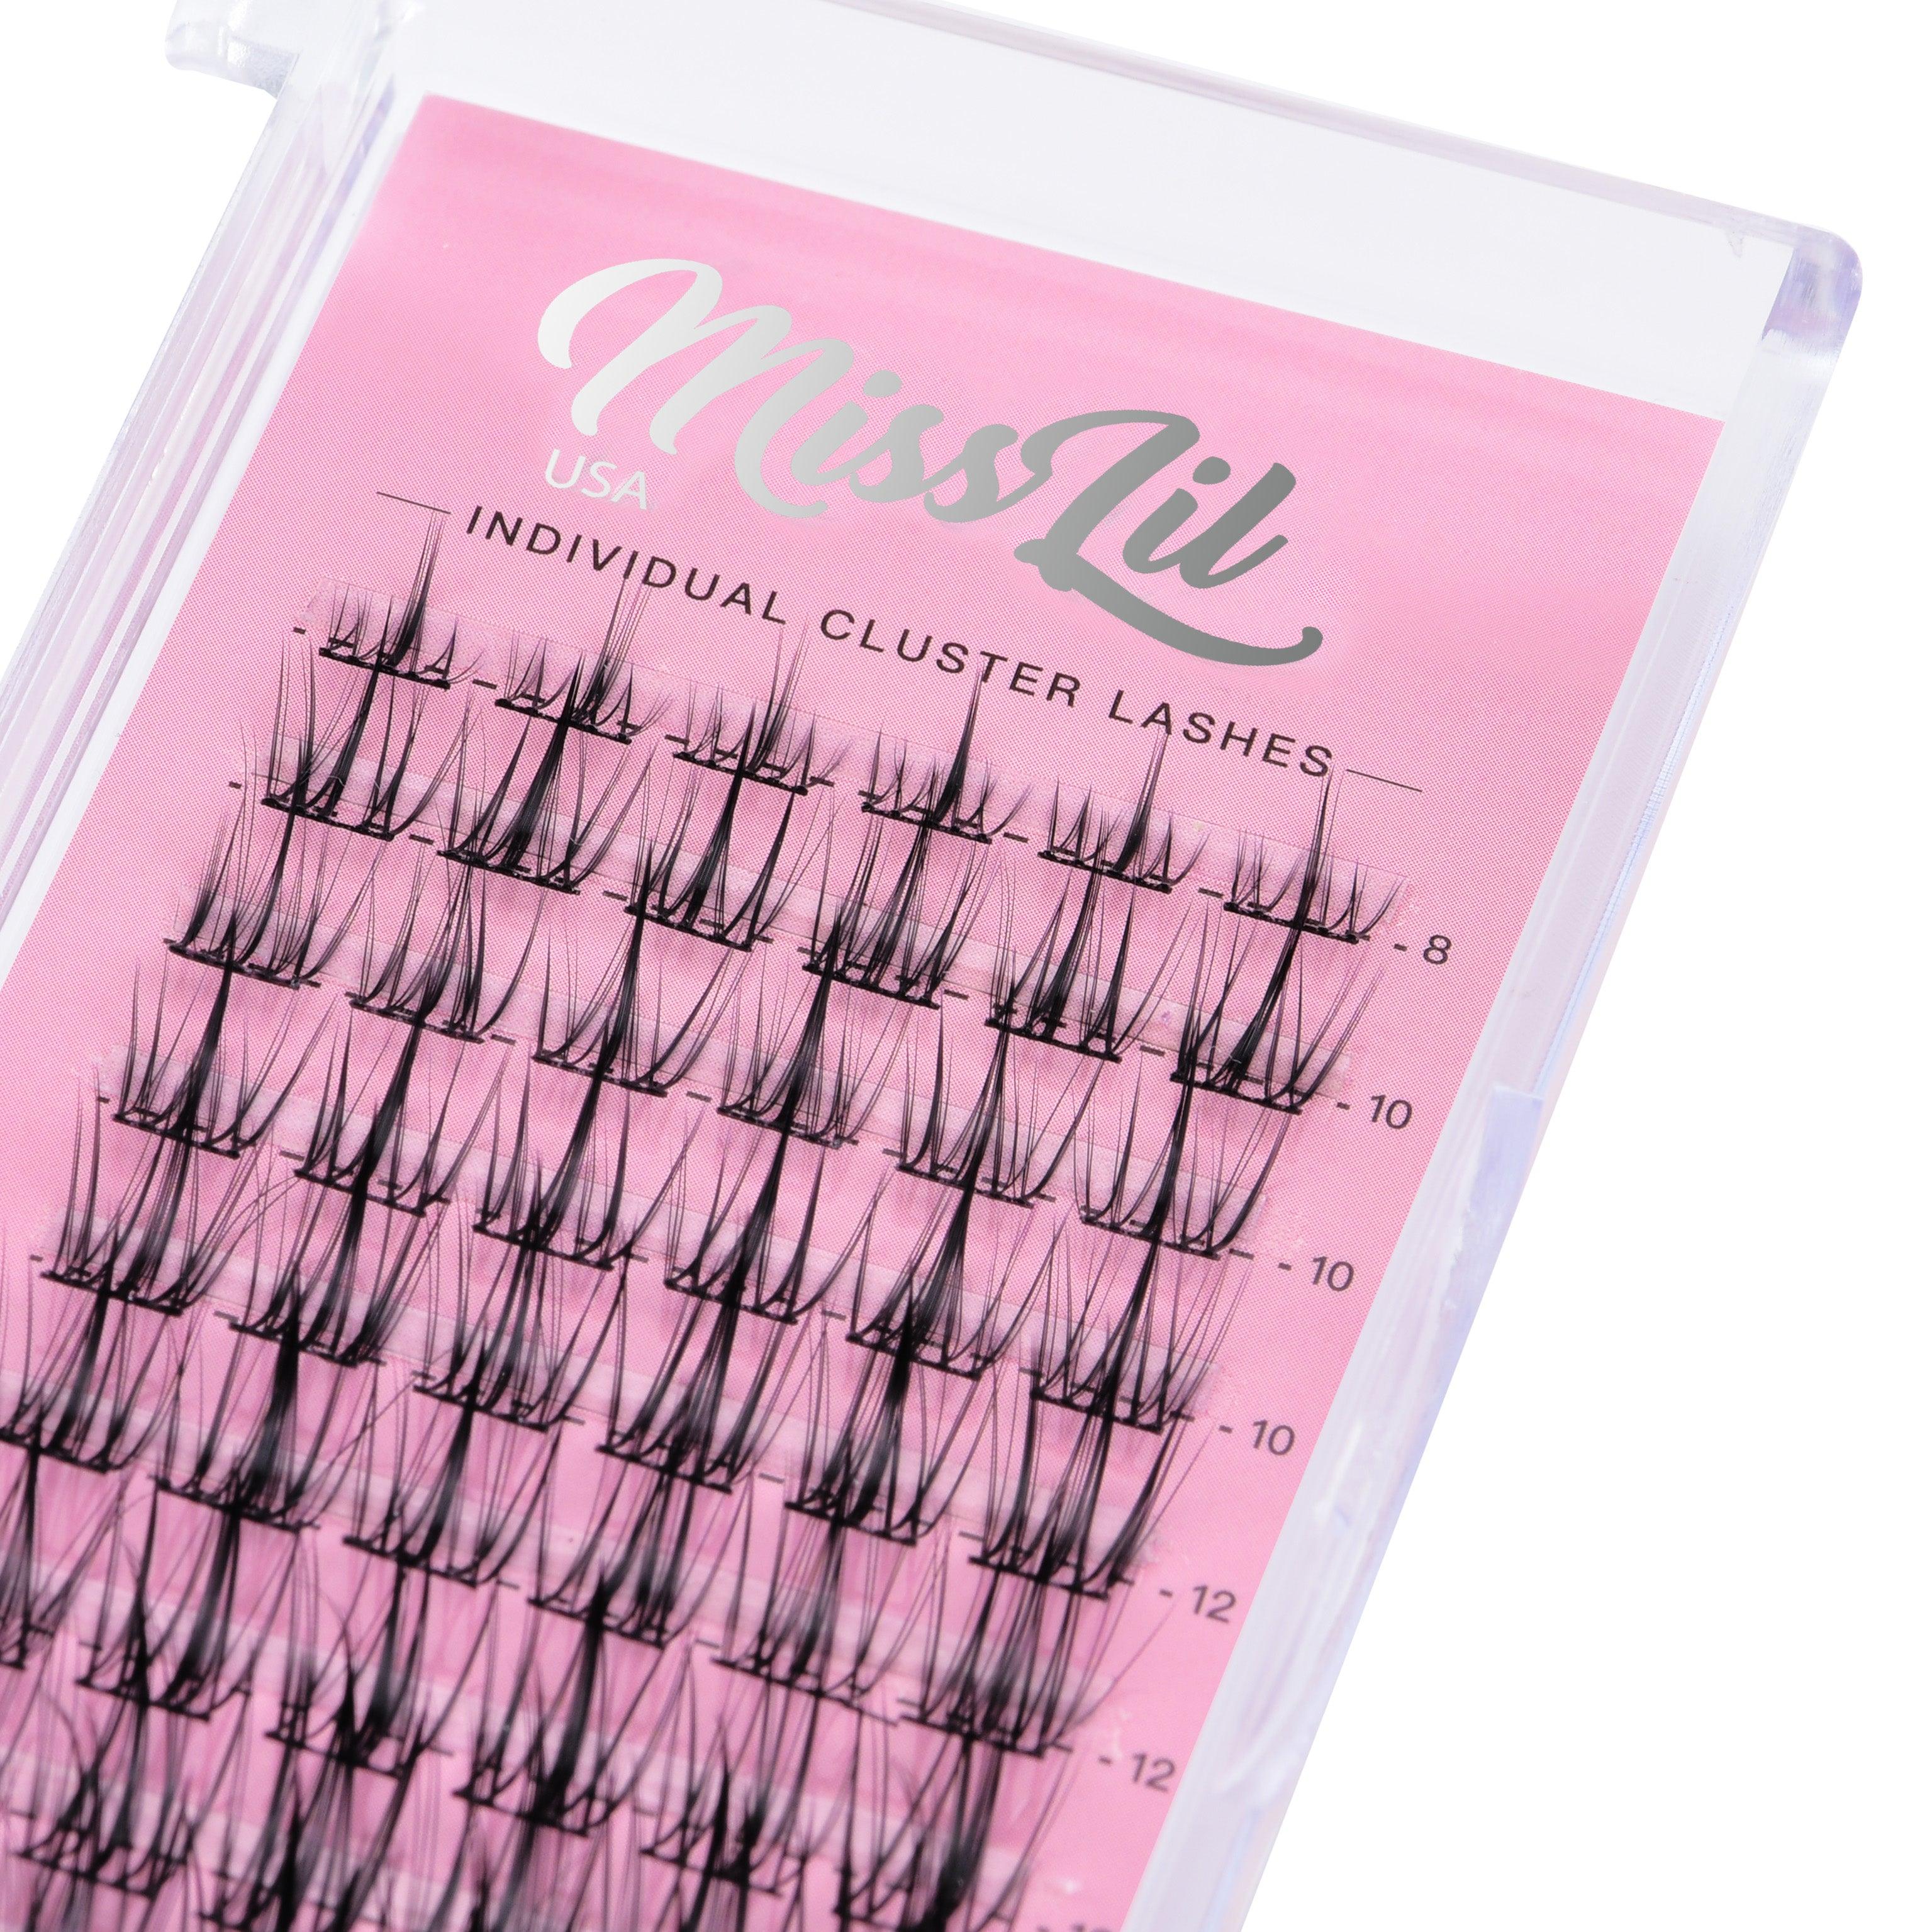 Individual Cluster Lashes AD-50 (6 Small Mixed Trays) - Miss Lil USA